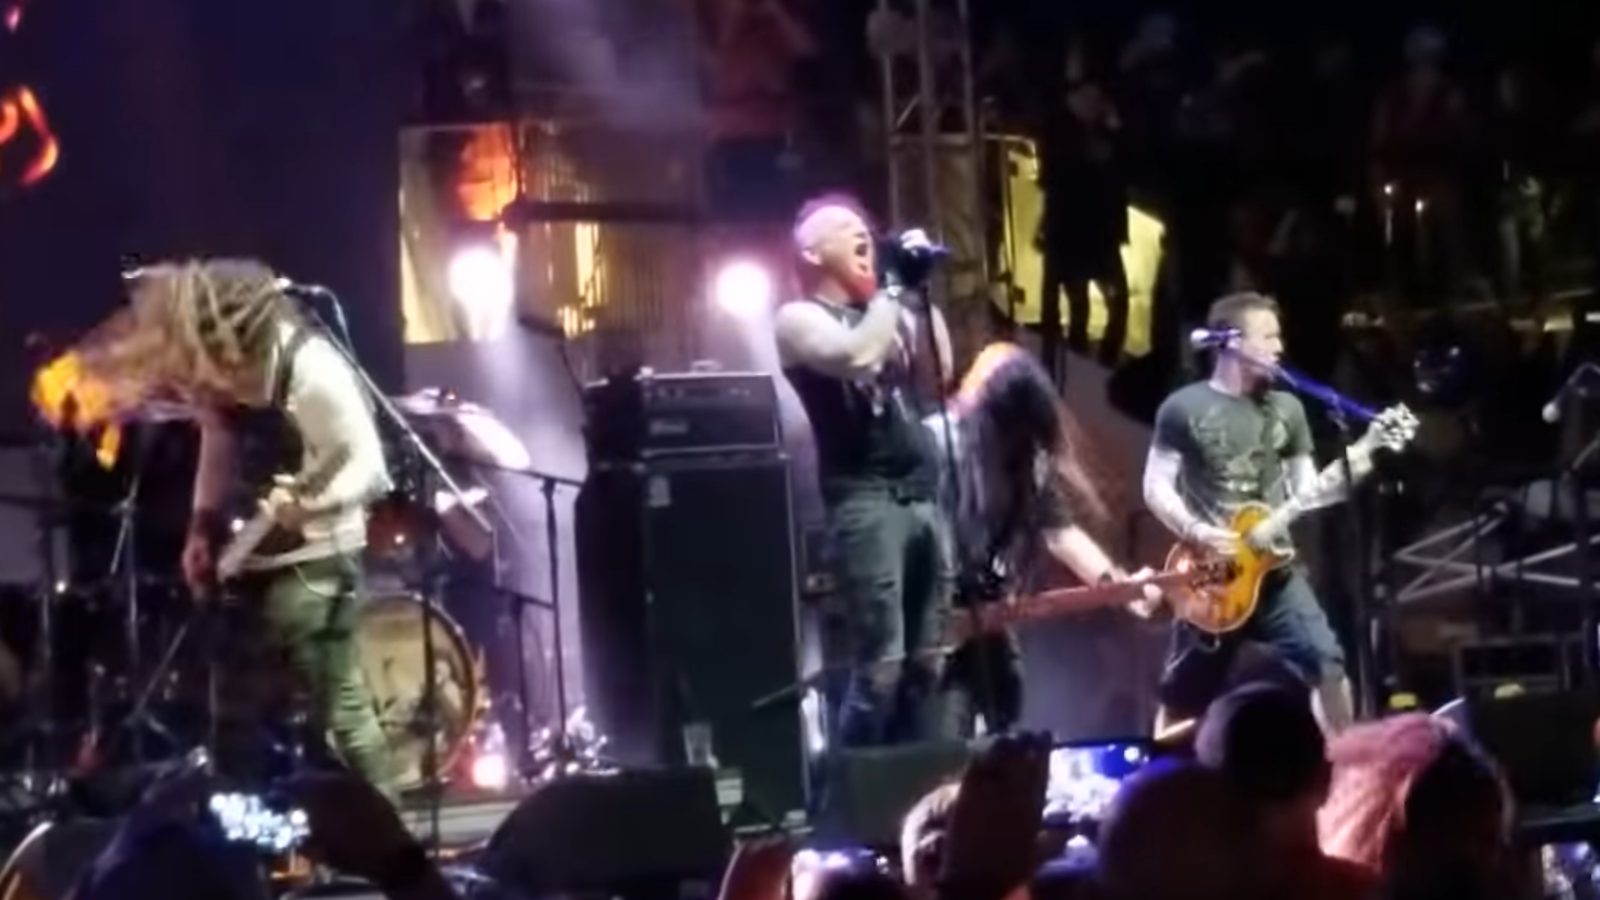 See Mudvayne's Chad Gray Sing Korn's "Blind" With Brian "Head" Welch in